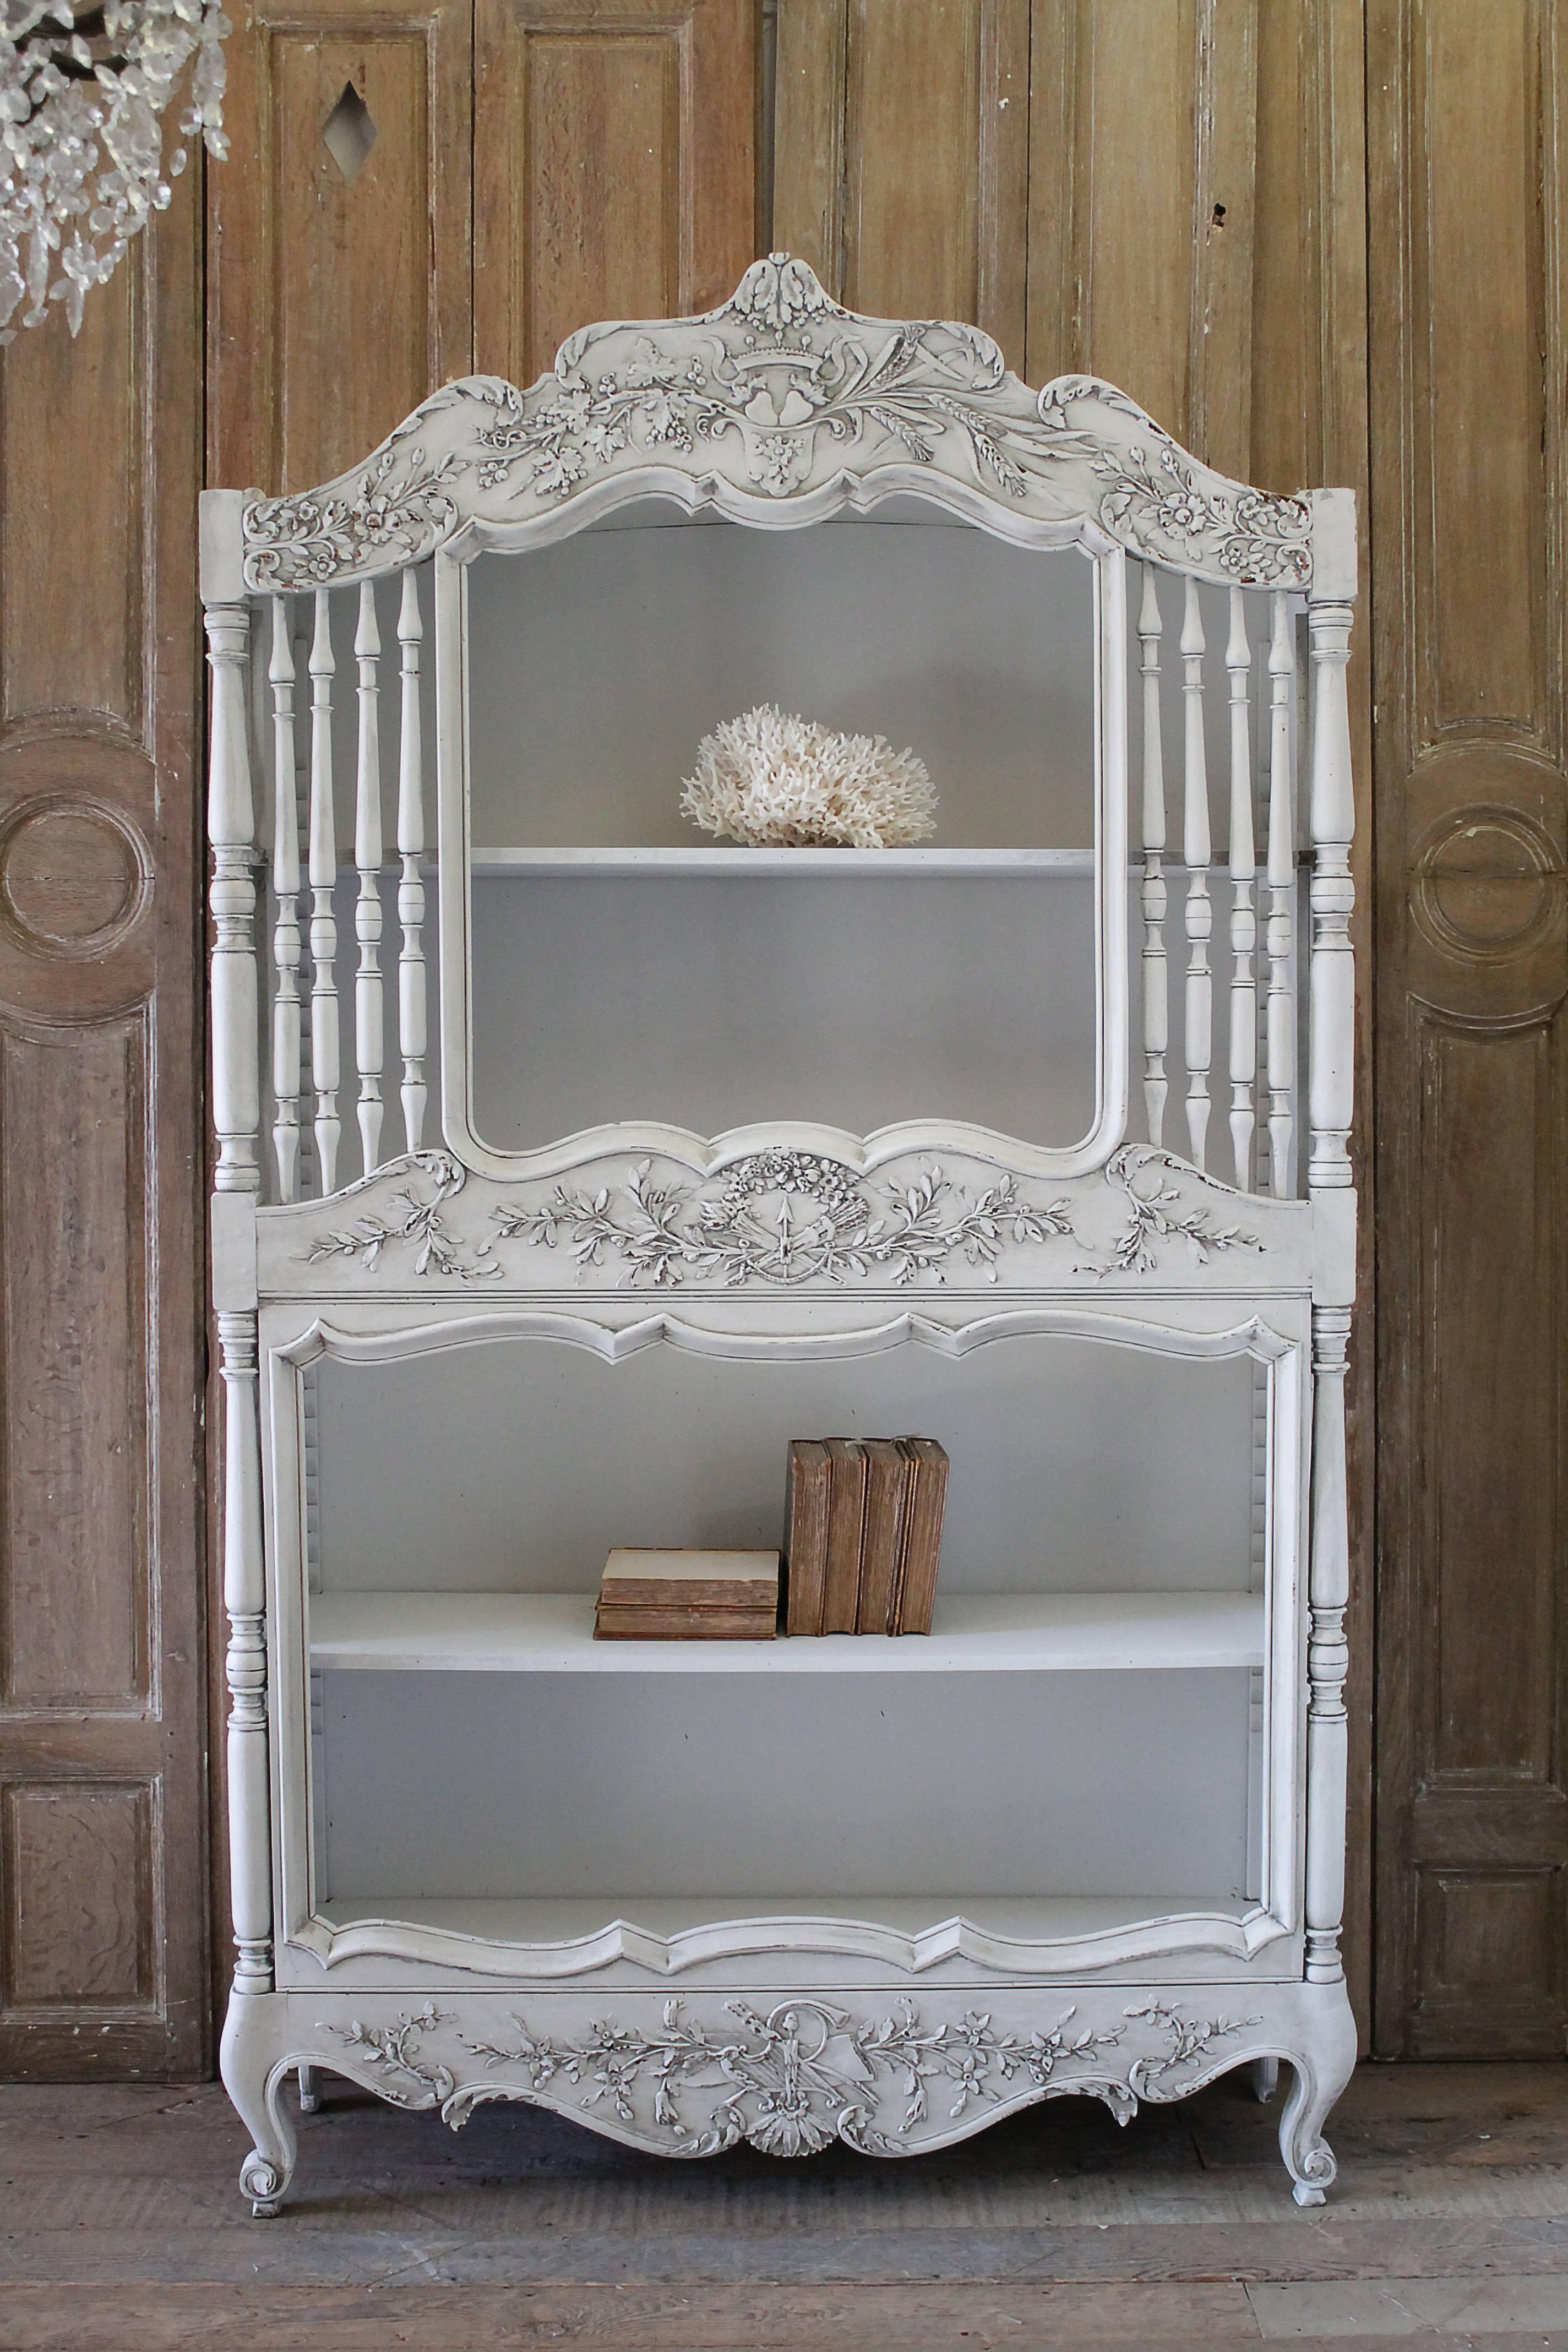 19th century painted Louis XV style display bookcase with beautiful carvings of a shield crest and crown with vines and leaves trailing across the top. The center carvings are of laurel leaves trailing away from a floral crown. Three adjustable